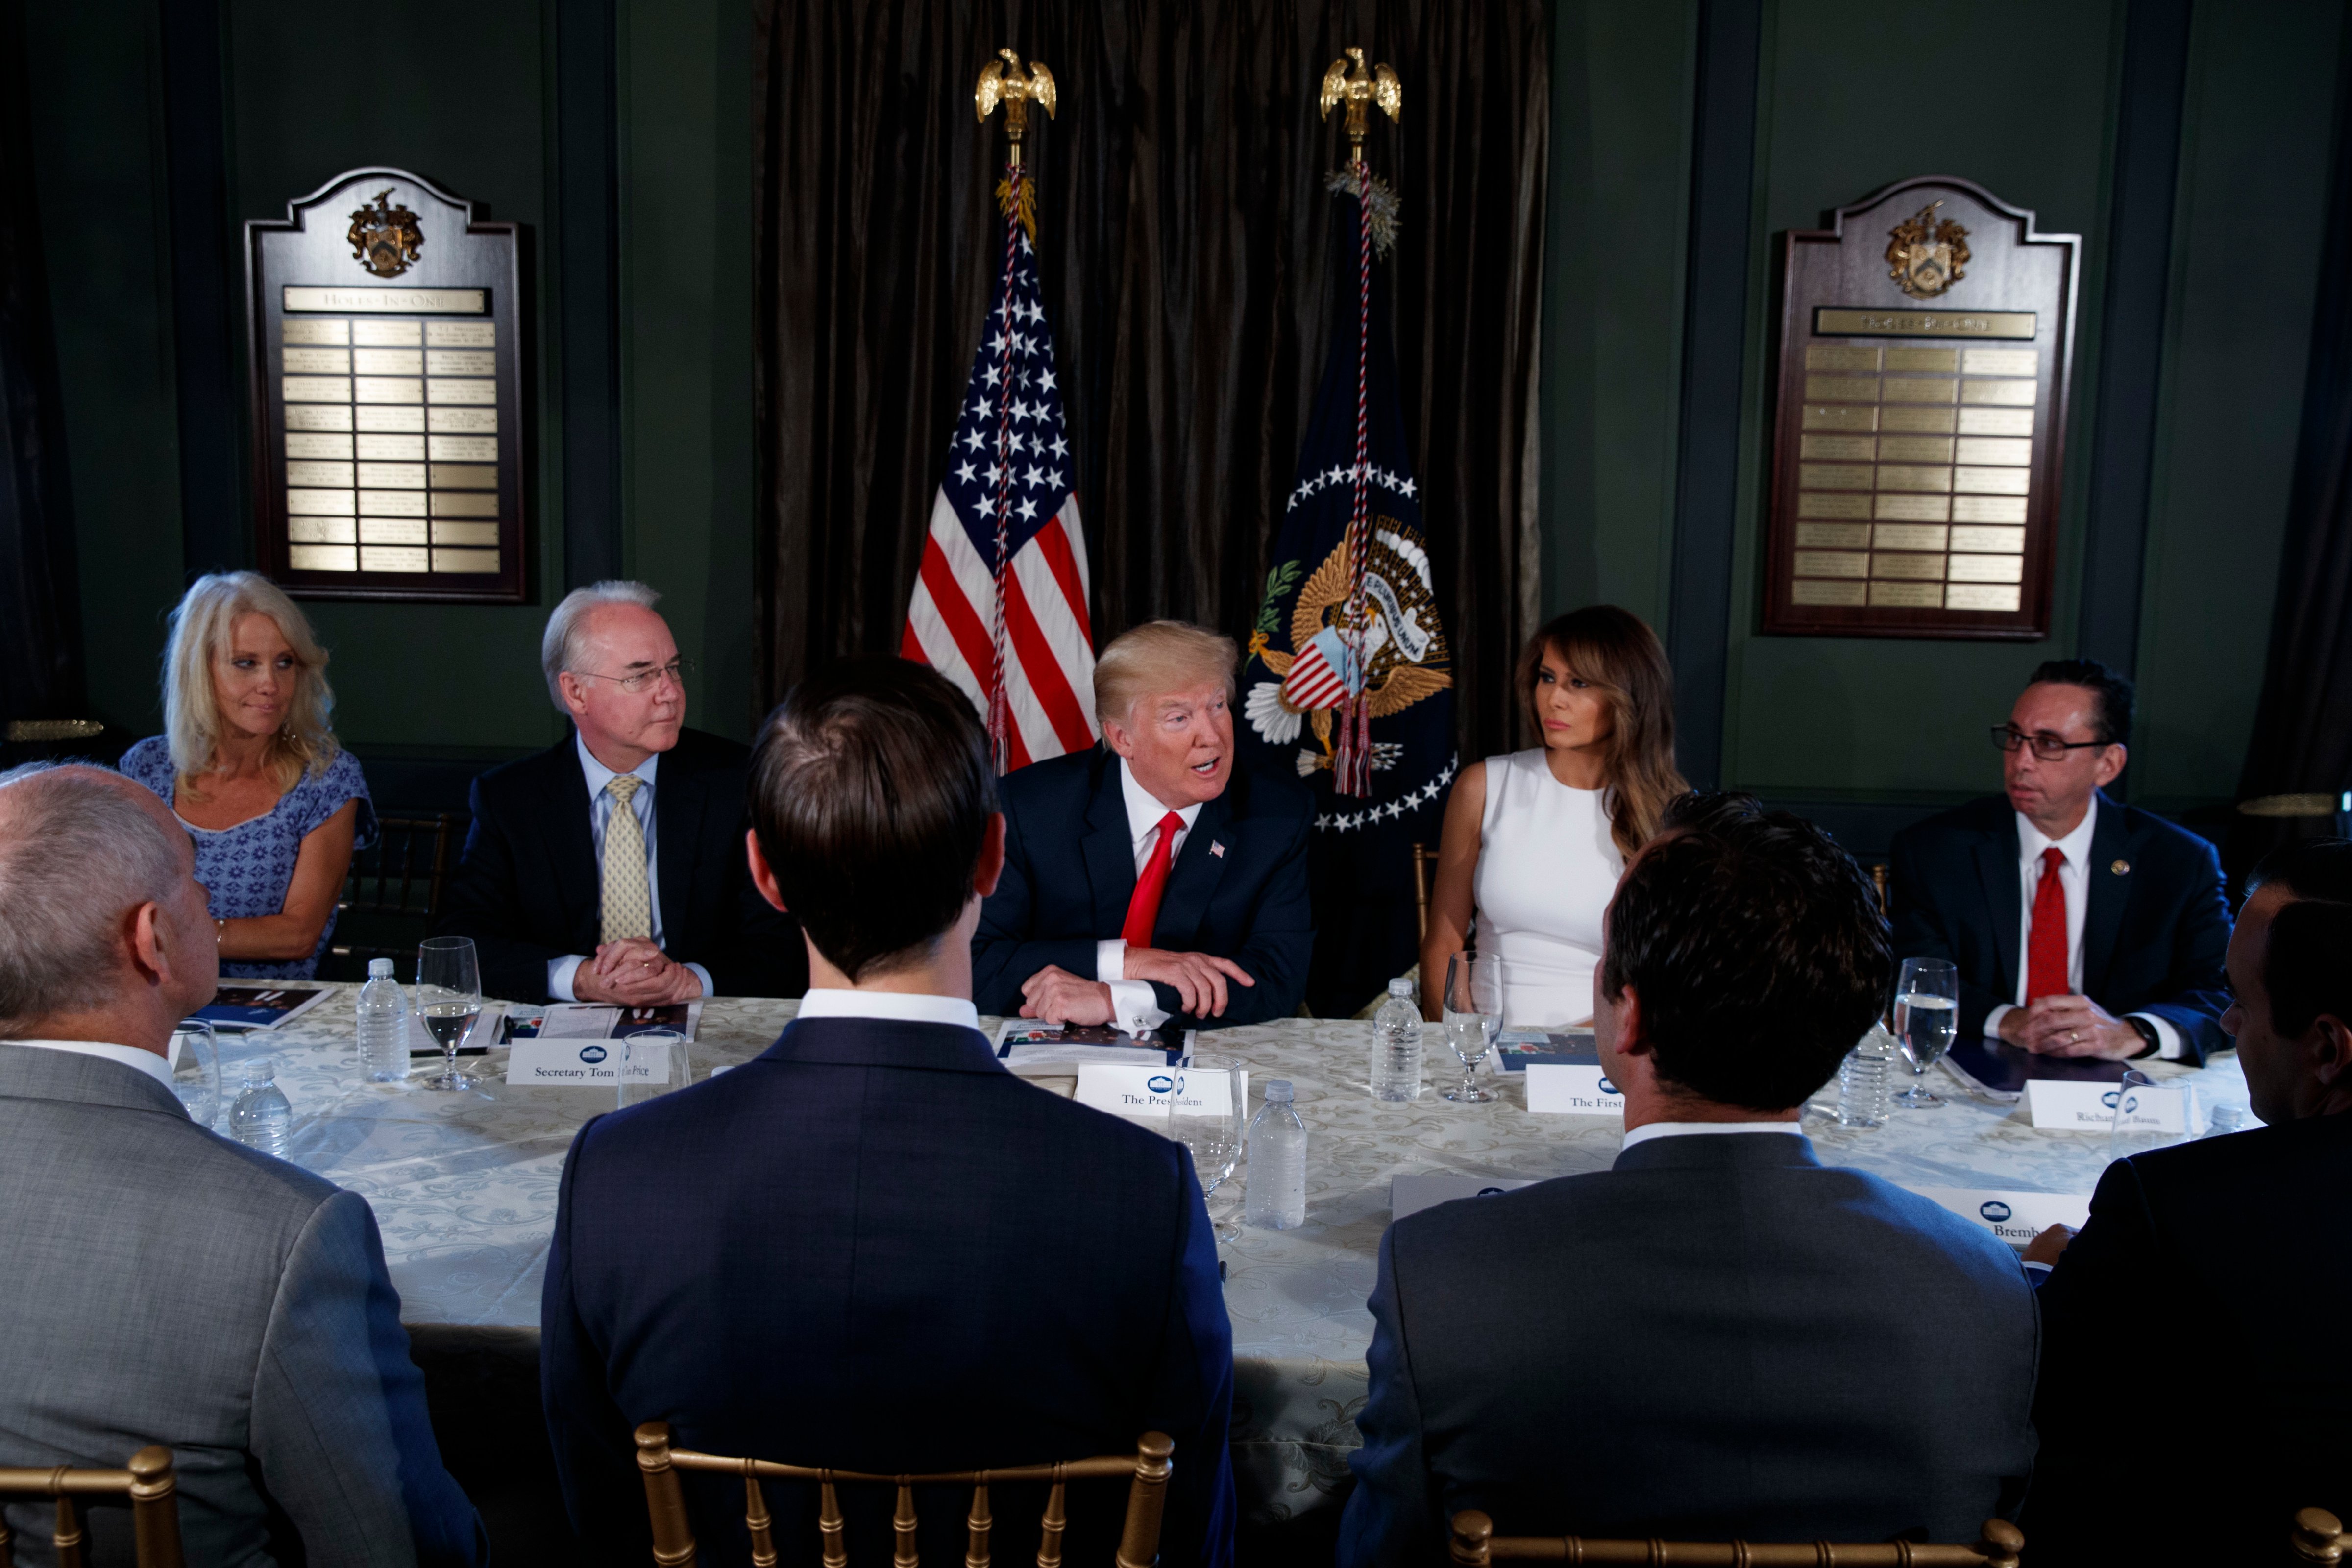 Trump speaks during a briefing on the opioid crisis on Aug. 8, 2017, at Trump National Golf Club in Bedminster, N.J. From left are, White House senior adviser Kellyanne Conway, Health and Human Services Secretary Tom Price, Trump, First Lady Melania Trump, and National Drug Control Policy acting Director Richard Baum. (Evan Vucci—AP)